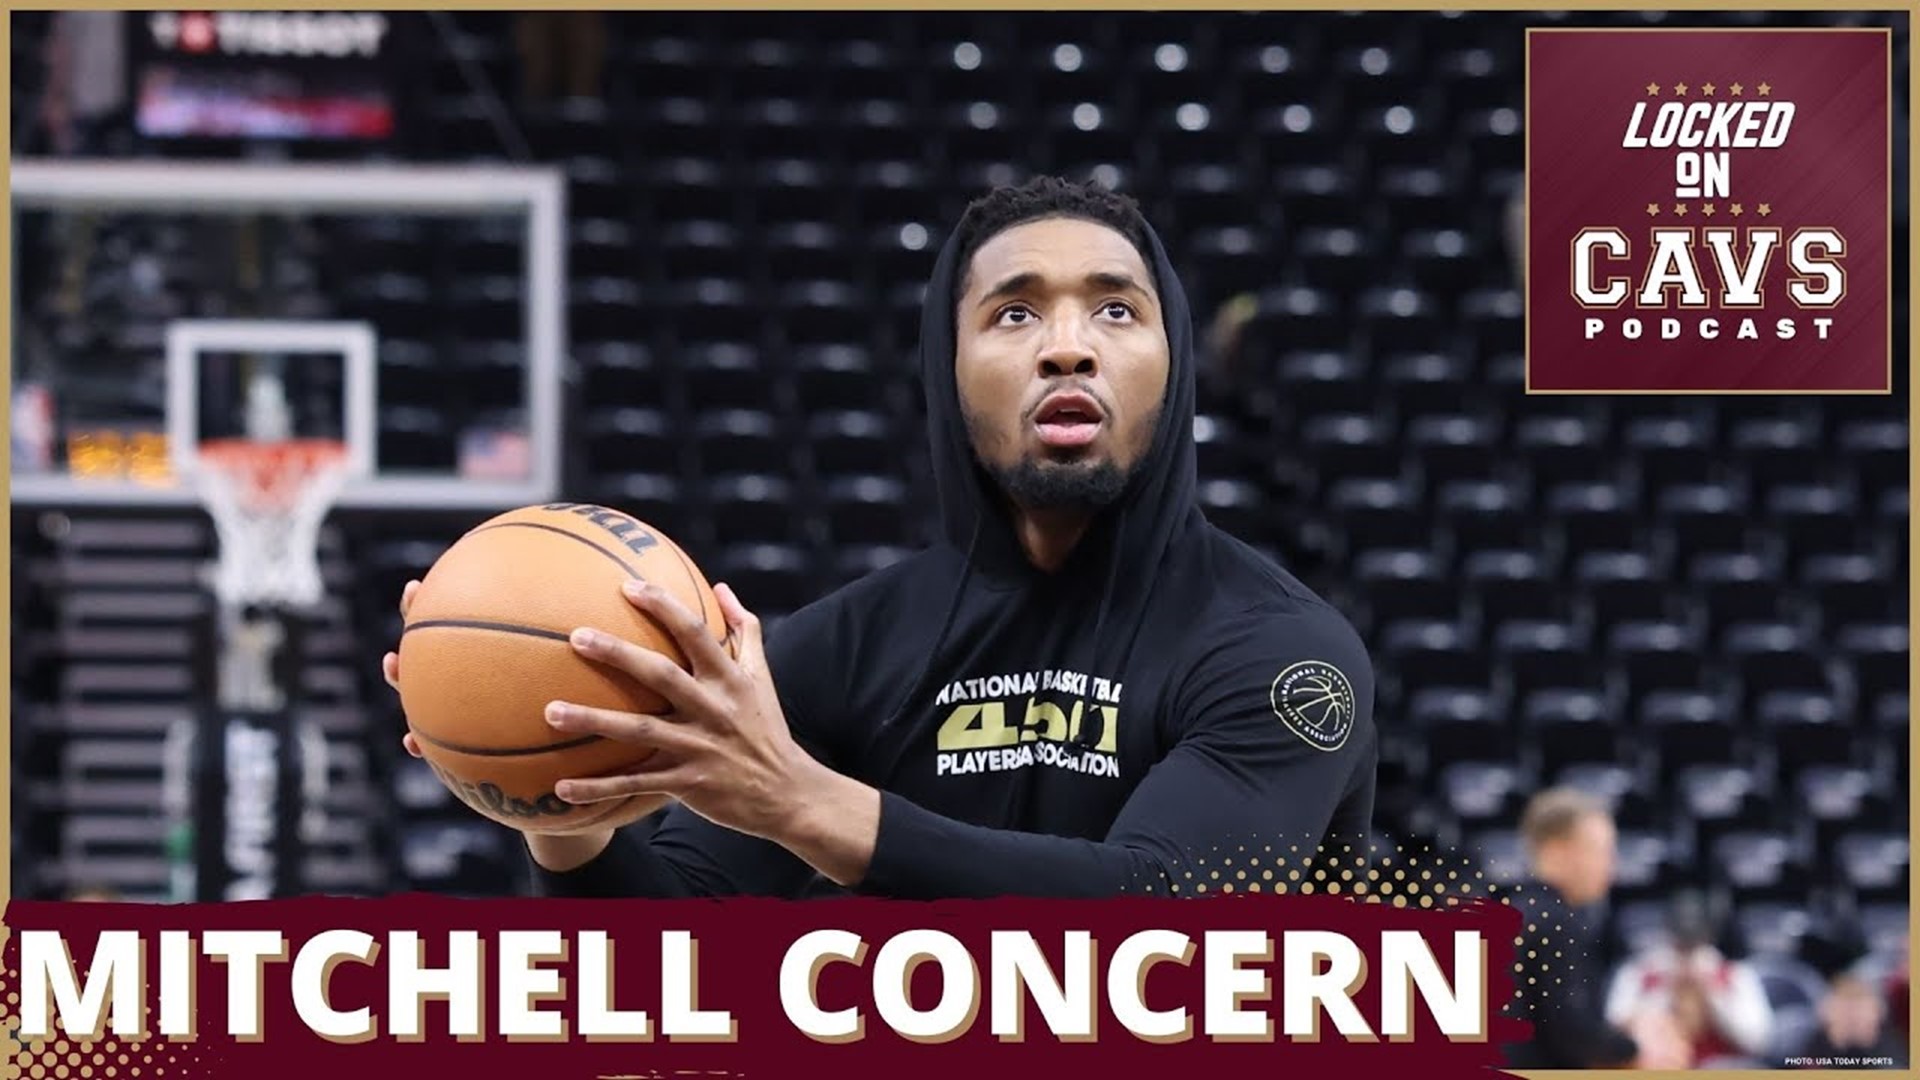 The latest on Donovan Mitchell, concern over his health heading into the playoffs, how he’s clearly not right